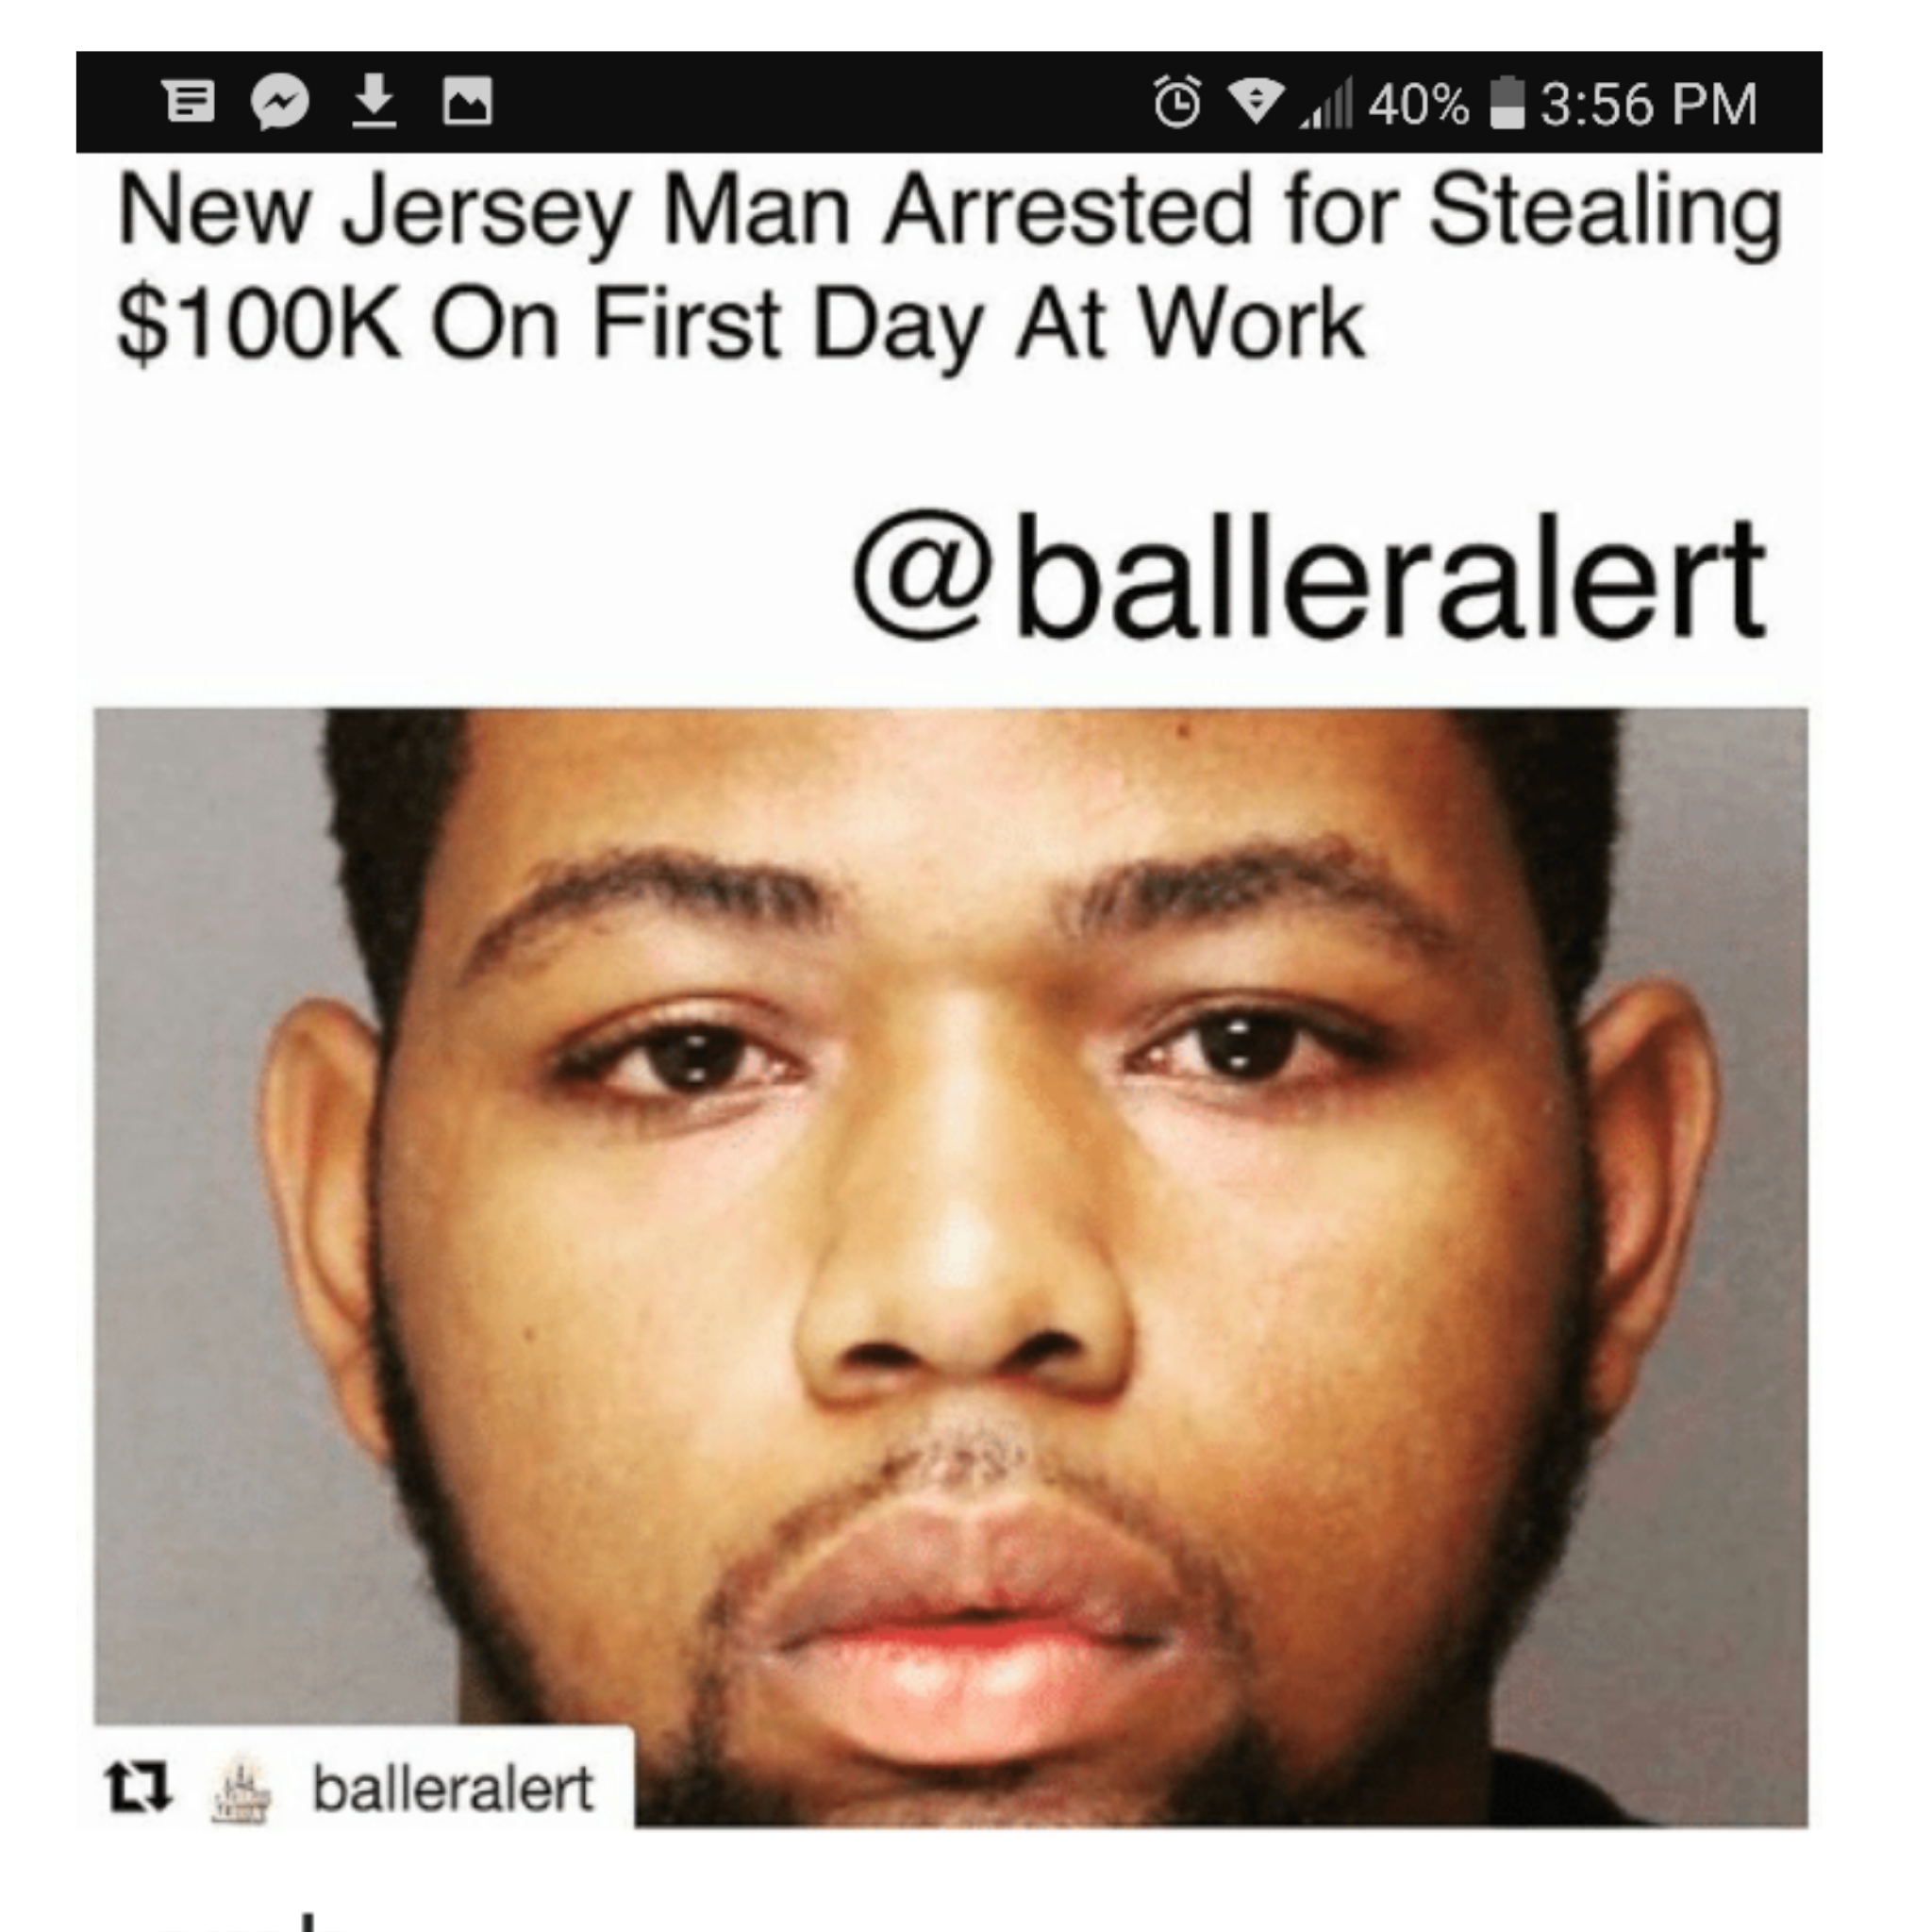 photo caption - 40% New Jersey Man Arrested for Stealing $ On First Day At Work L1 balleralert